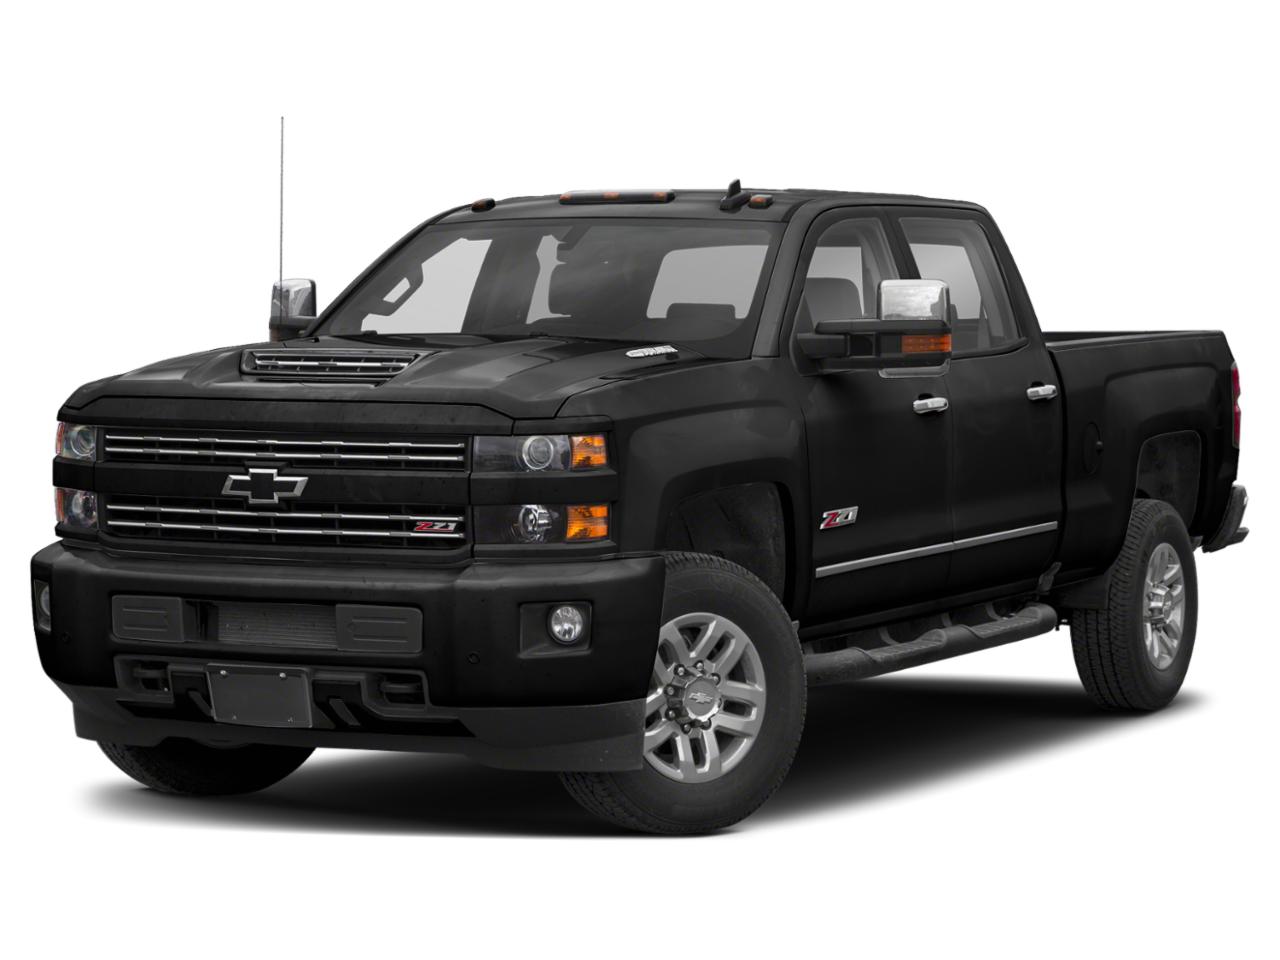 Pre-Owned 2019 Chevrolet Silverado 3500HD Crew Cab Standard Box 4-Wheel  Drive High Country VIN 1GC4KYEY9KF170186 Stock Number 22336A